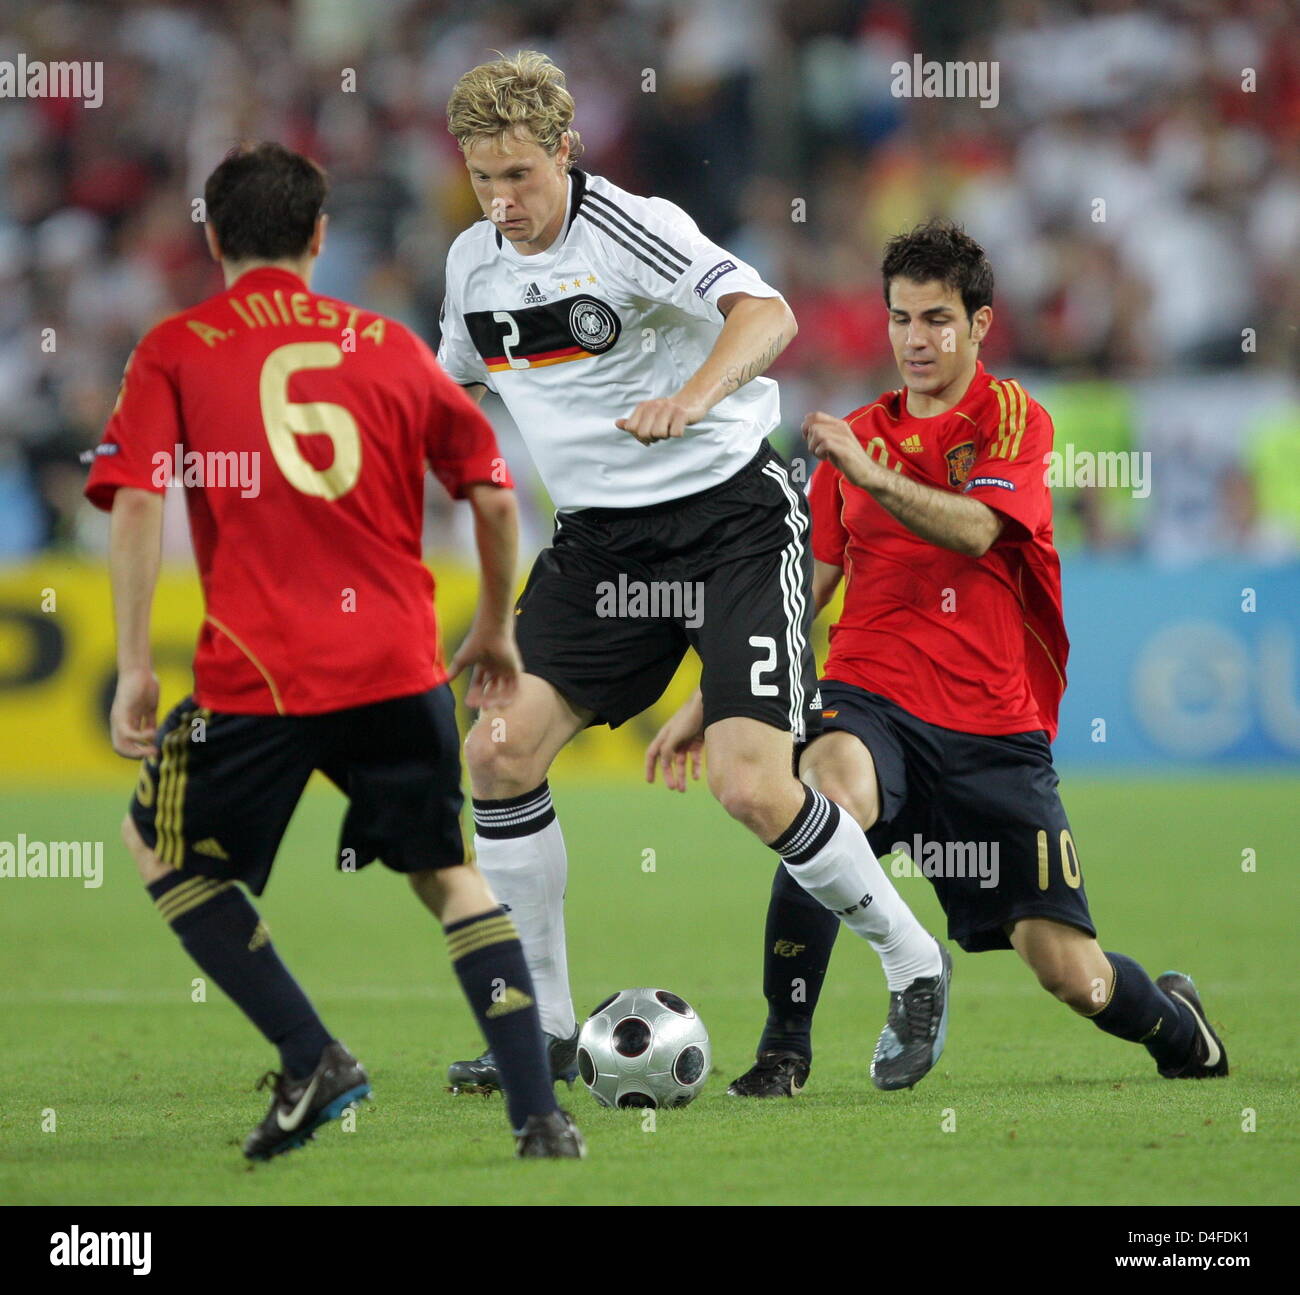 Marcell Jansen (C) of Germany vies with Cesc Fabregas and Andres Iniesta (L) of Spain during the UEFA EURO 2008 final match between Germany and Spain at the Ernst Happel stadium in Vienna, Austria, 29 June 2008. Spain won 1-0. Photo: Ronald Wittek dpa +please note UEFA restrictions particulary in regard to slide shows and 'No Mobile Services'+ +++(c) dpa - Bildfunk+++ Stock Photo